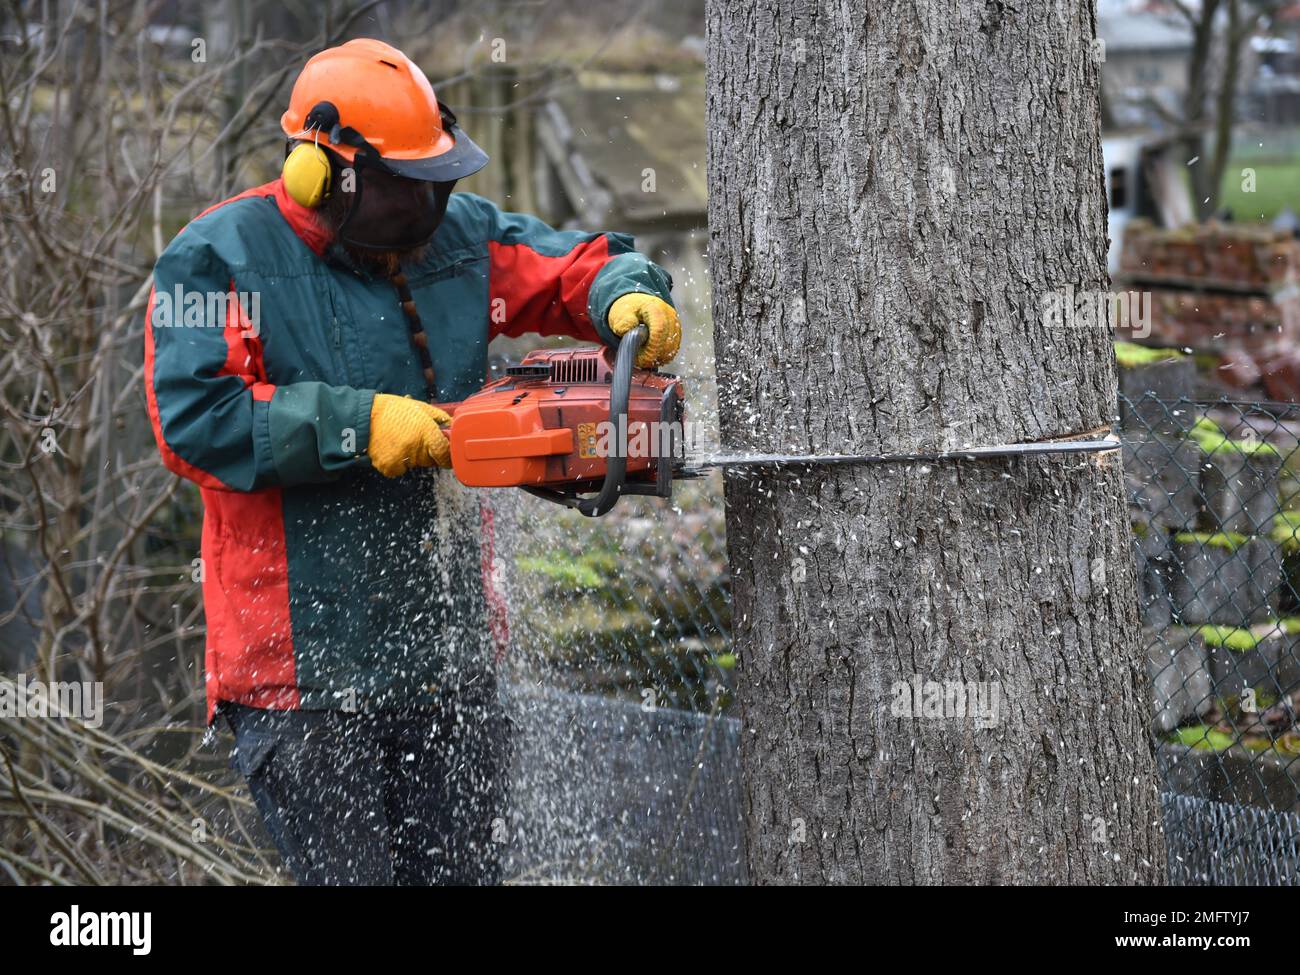 Worker with safety helmet and headphones, noise protection, felling a tree, Germany Stock Photo